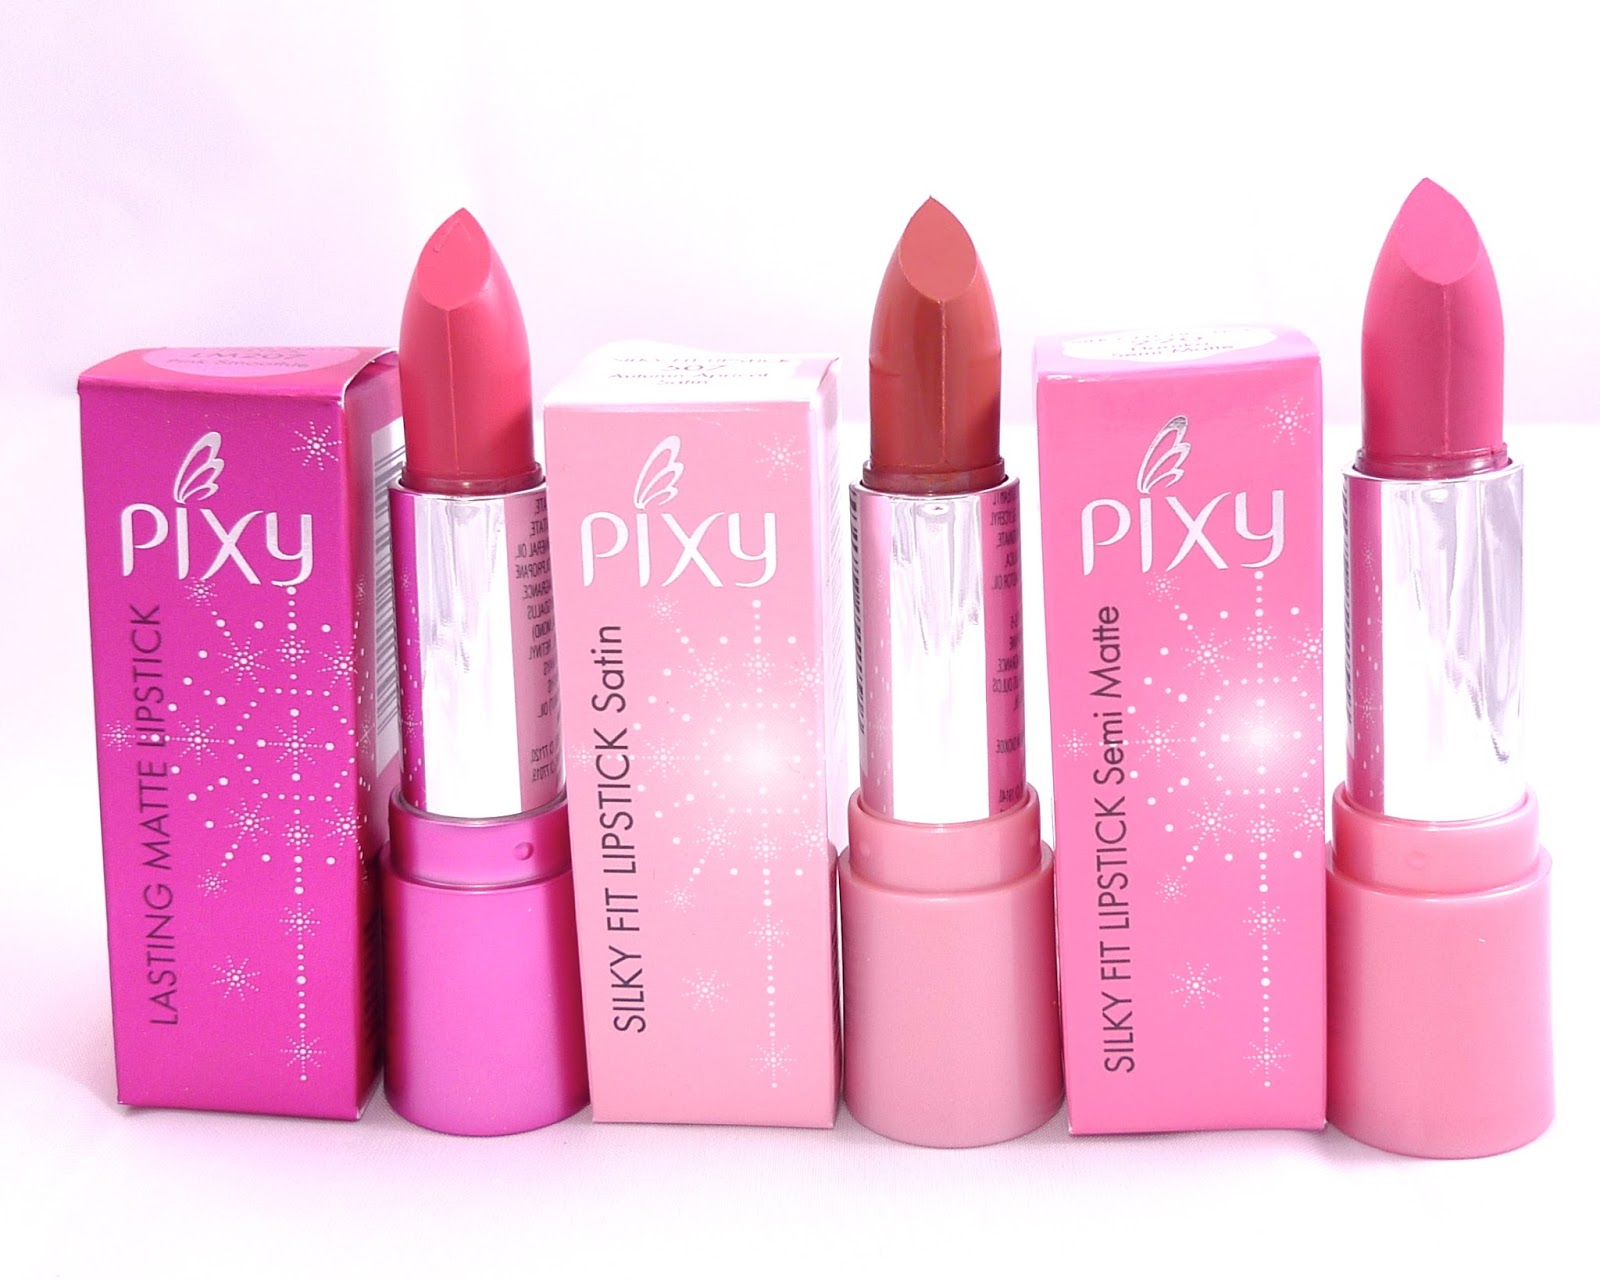 Pixy Lipsticks Review + Swatches The Beauty Junkee.